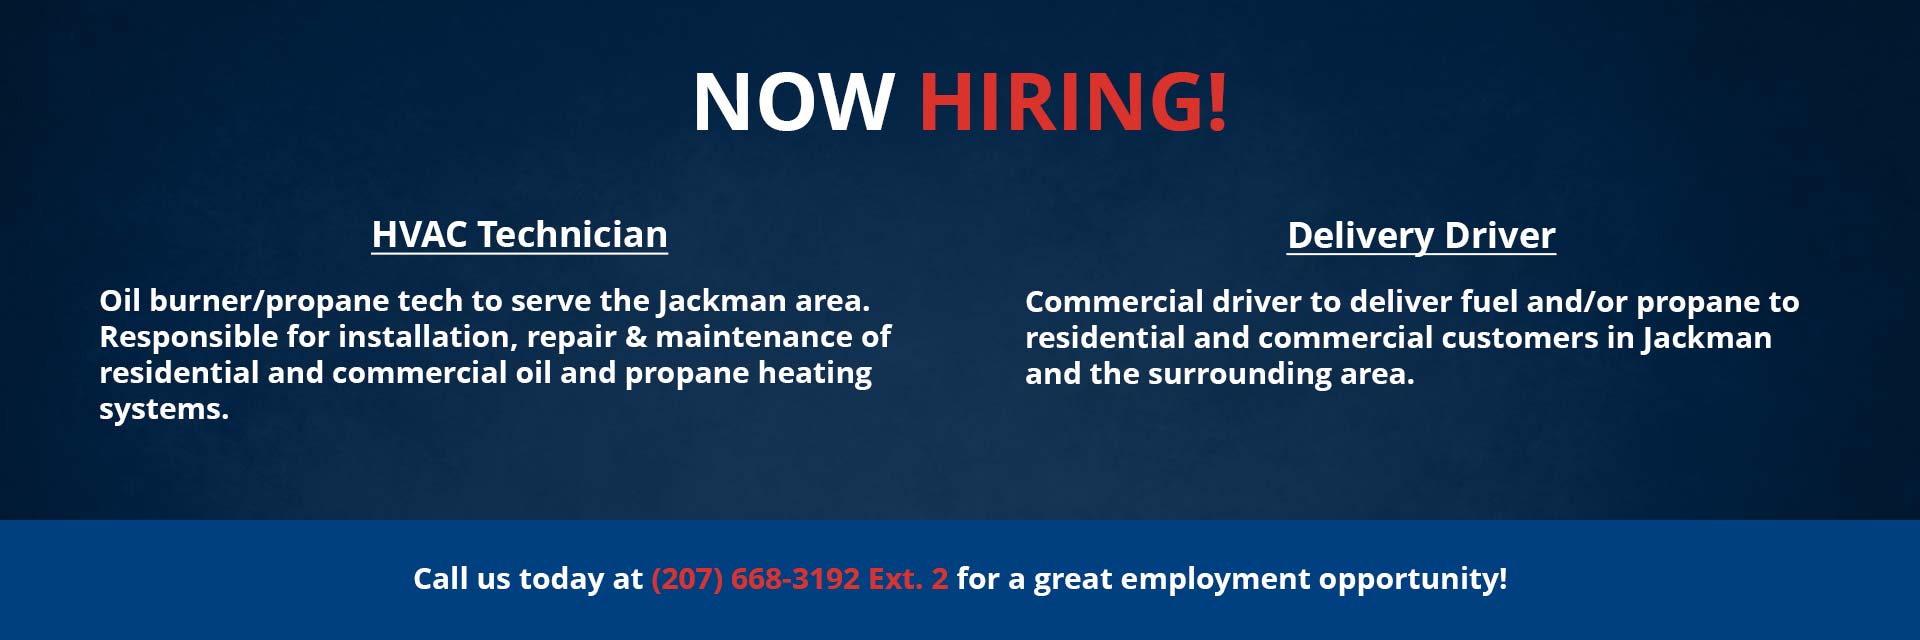 Now Hiring HVAC Techs and Deliver Drivers! Contact us to learn more!